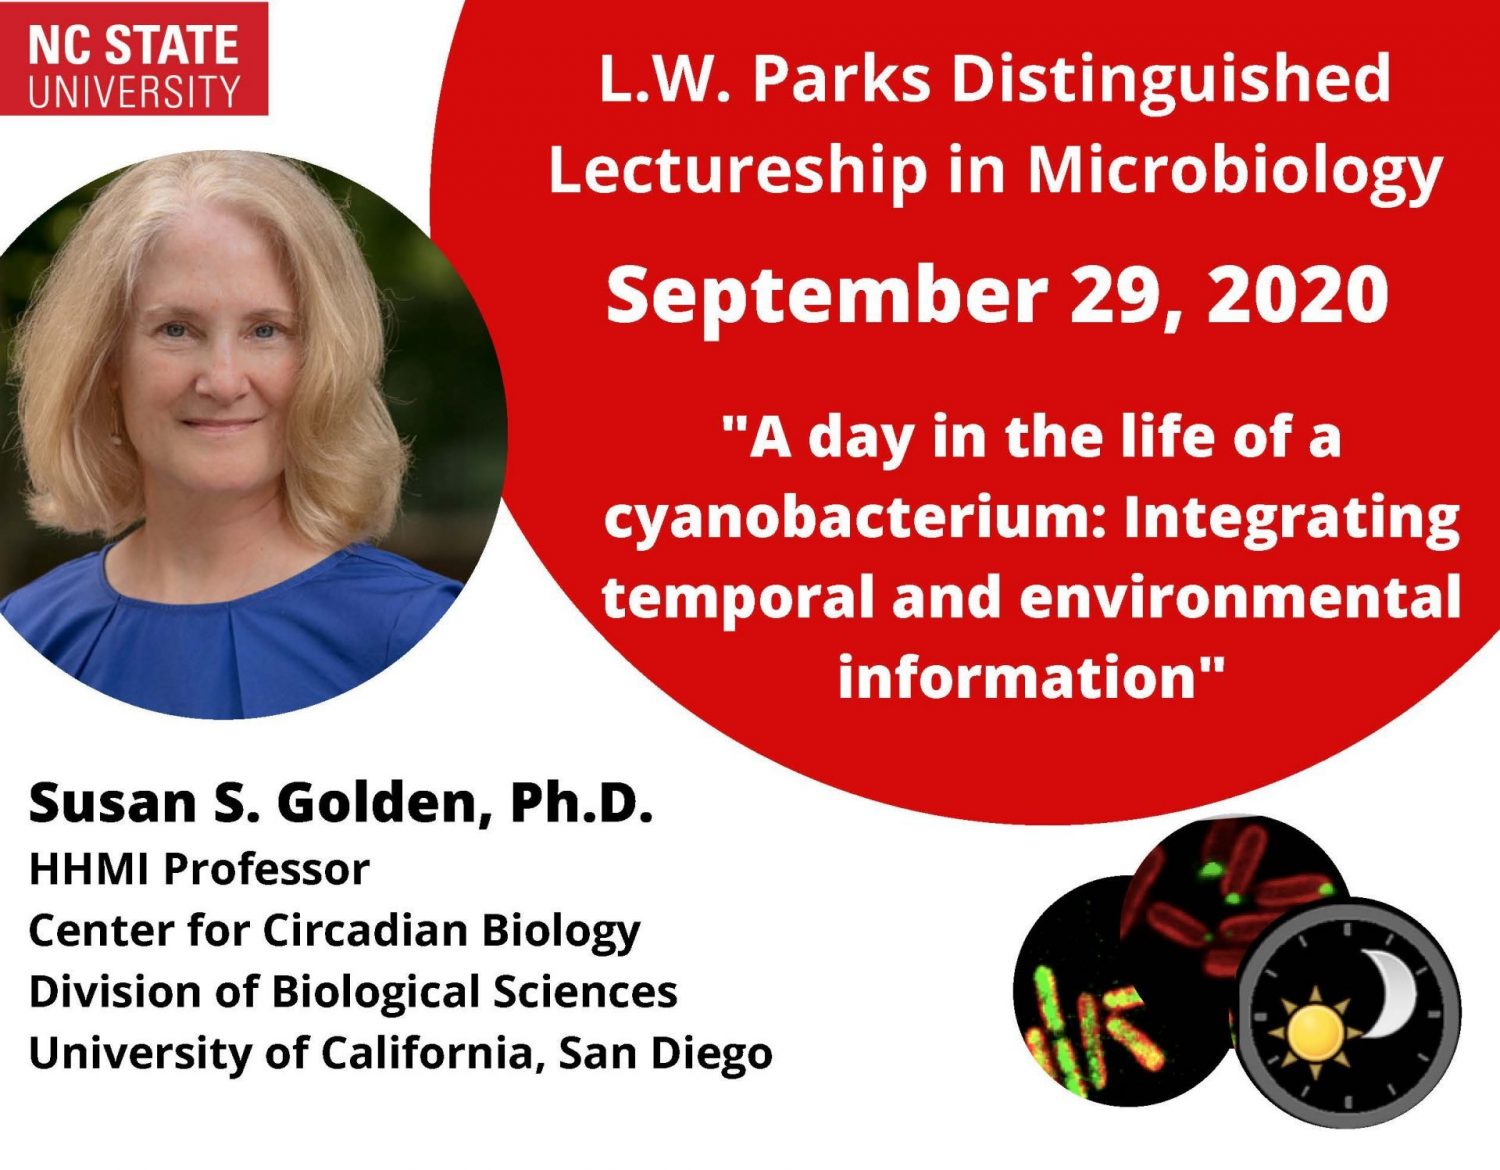 L.W. Parks Distinguished Lectureship in Microbiology Flyer from Septmeber 29, 2020. "A day in the life of a cyanobacterium: Integrating temporal and environmental information." Susan S. Golden, Ph.D., HHMI Professor, Center for Circadian Biolohgy, University of California, San Diego.